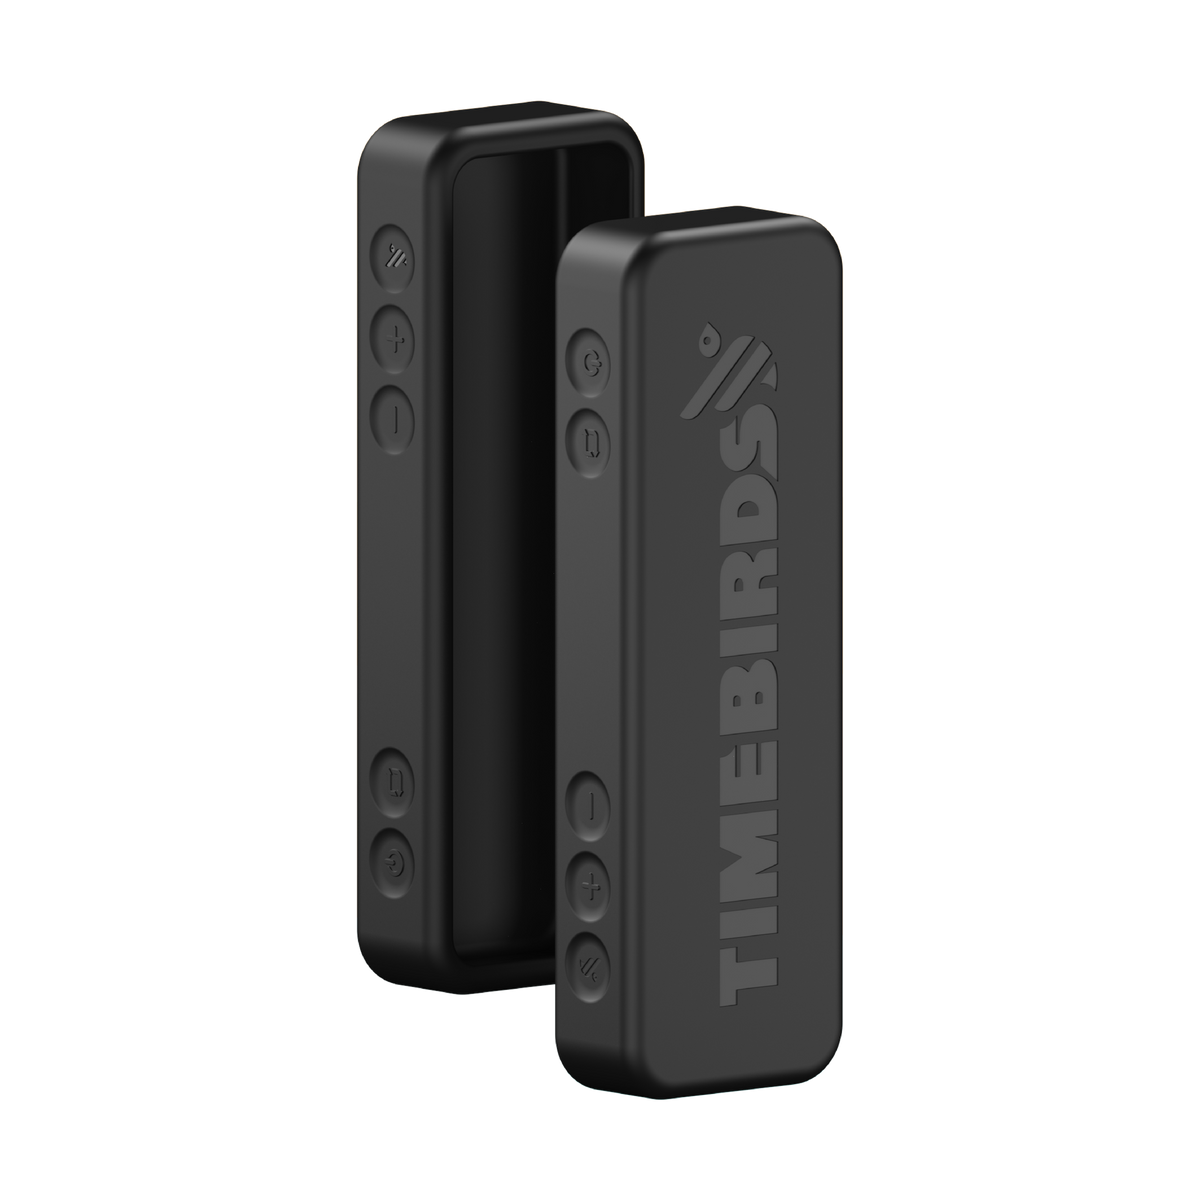 Timebirds™ Protective Case – Black out